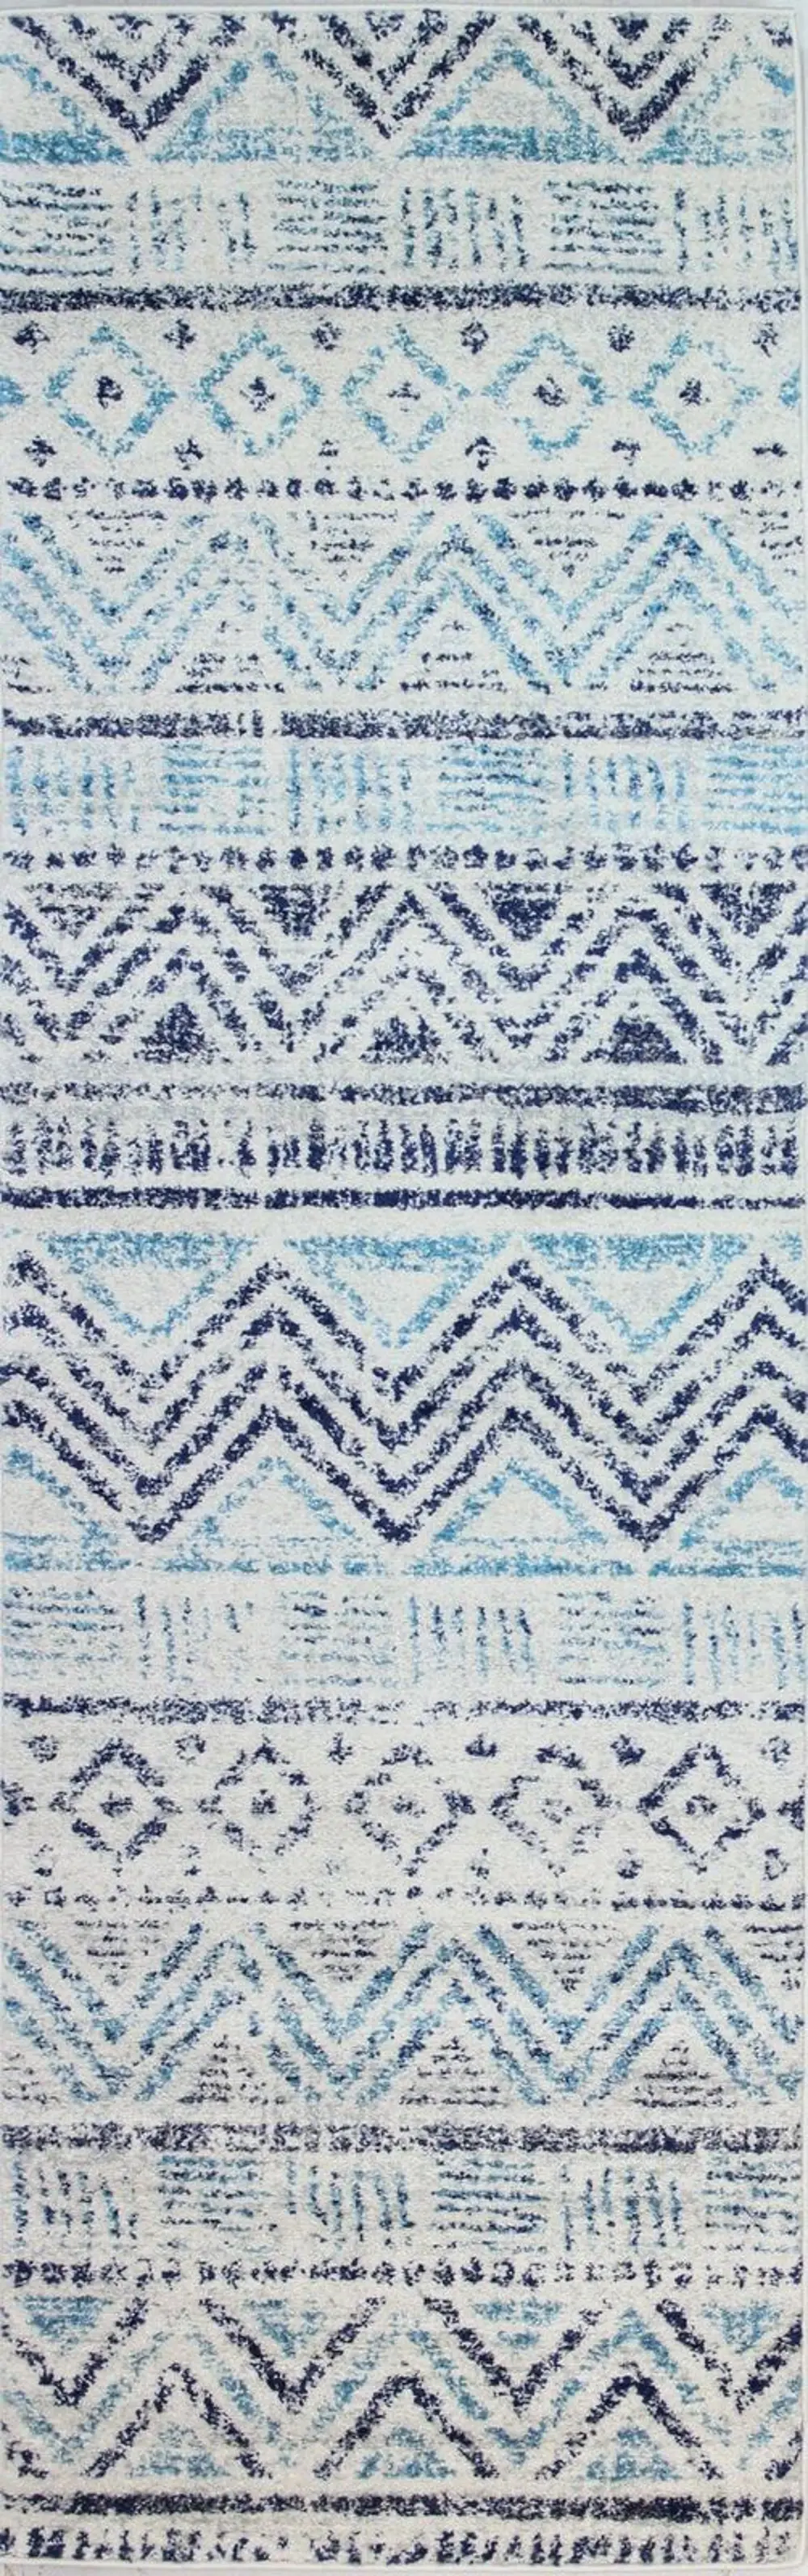 M147-IV-2.6X8-MR604 Transitional Zeisha Blue and Ivory 8 Foot Runner Rug - Mayfair-1